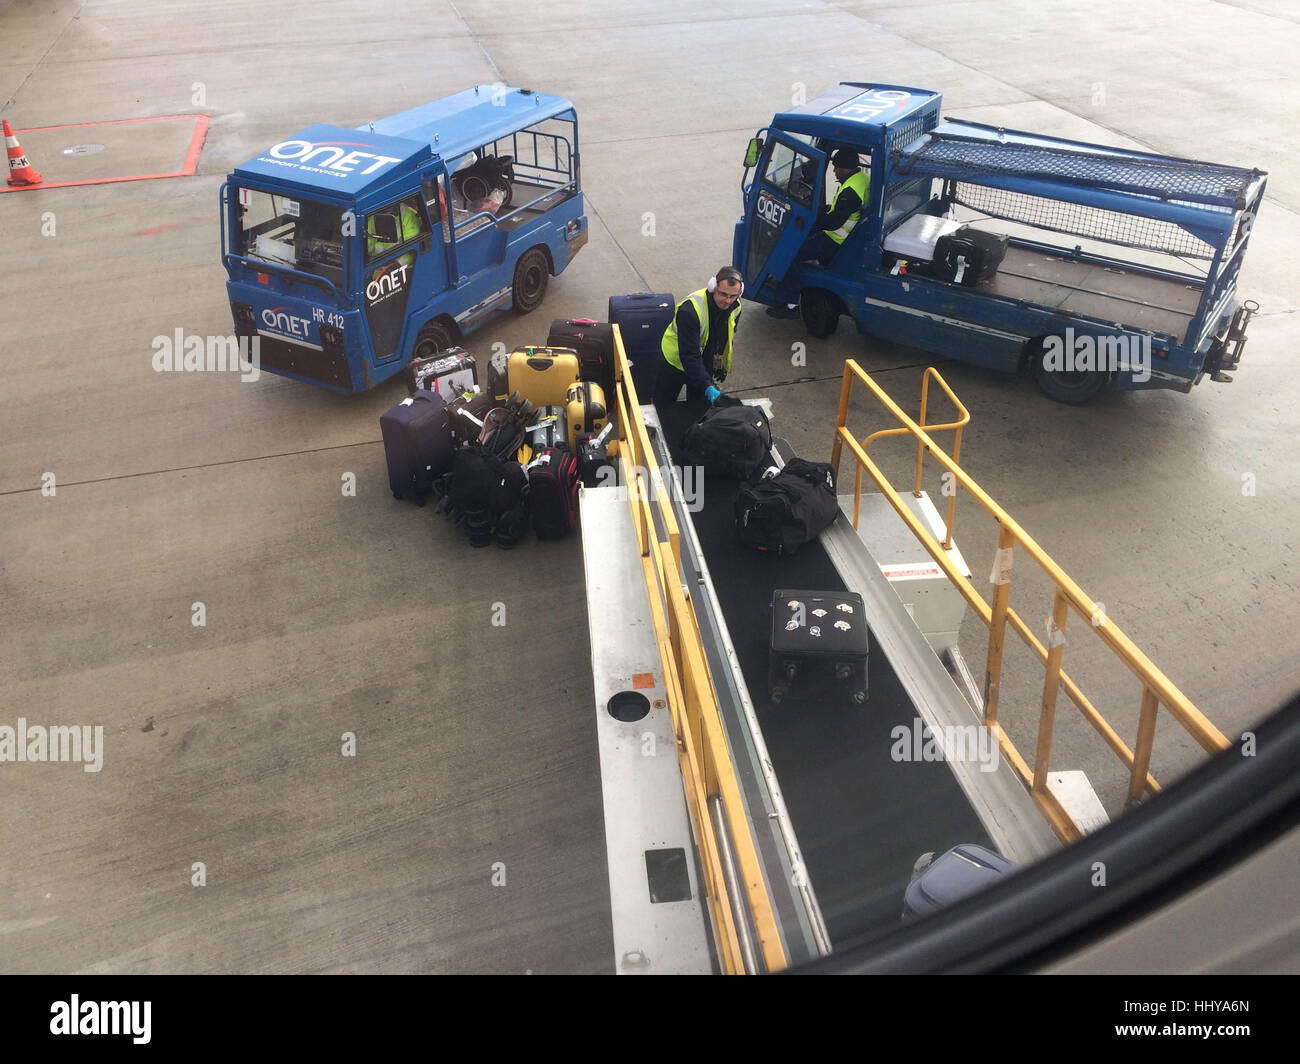 Airport workers unload luggage from the aircraft after landing at the Charles de Gaulle Airport in Paris, France. Stock Photo